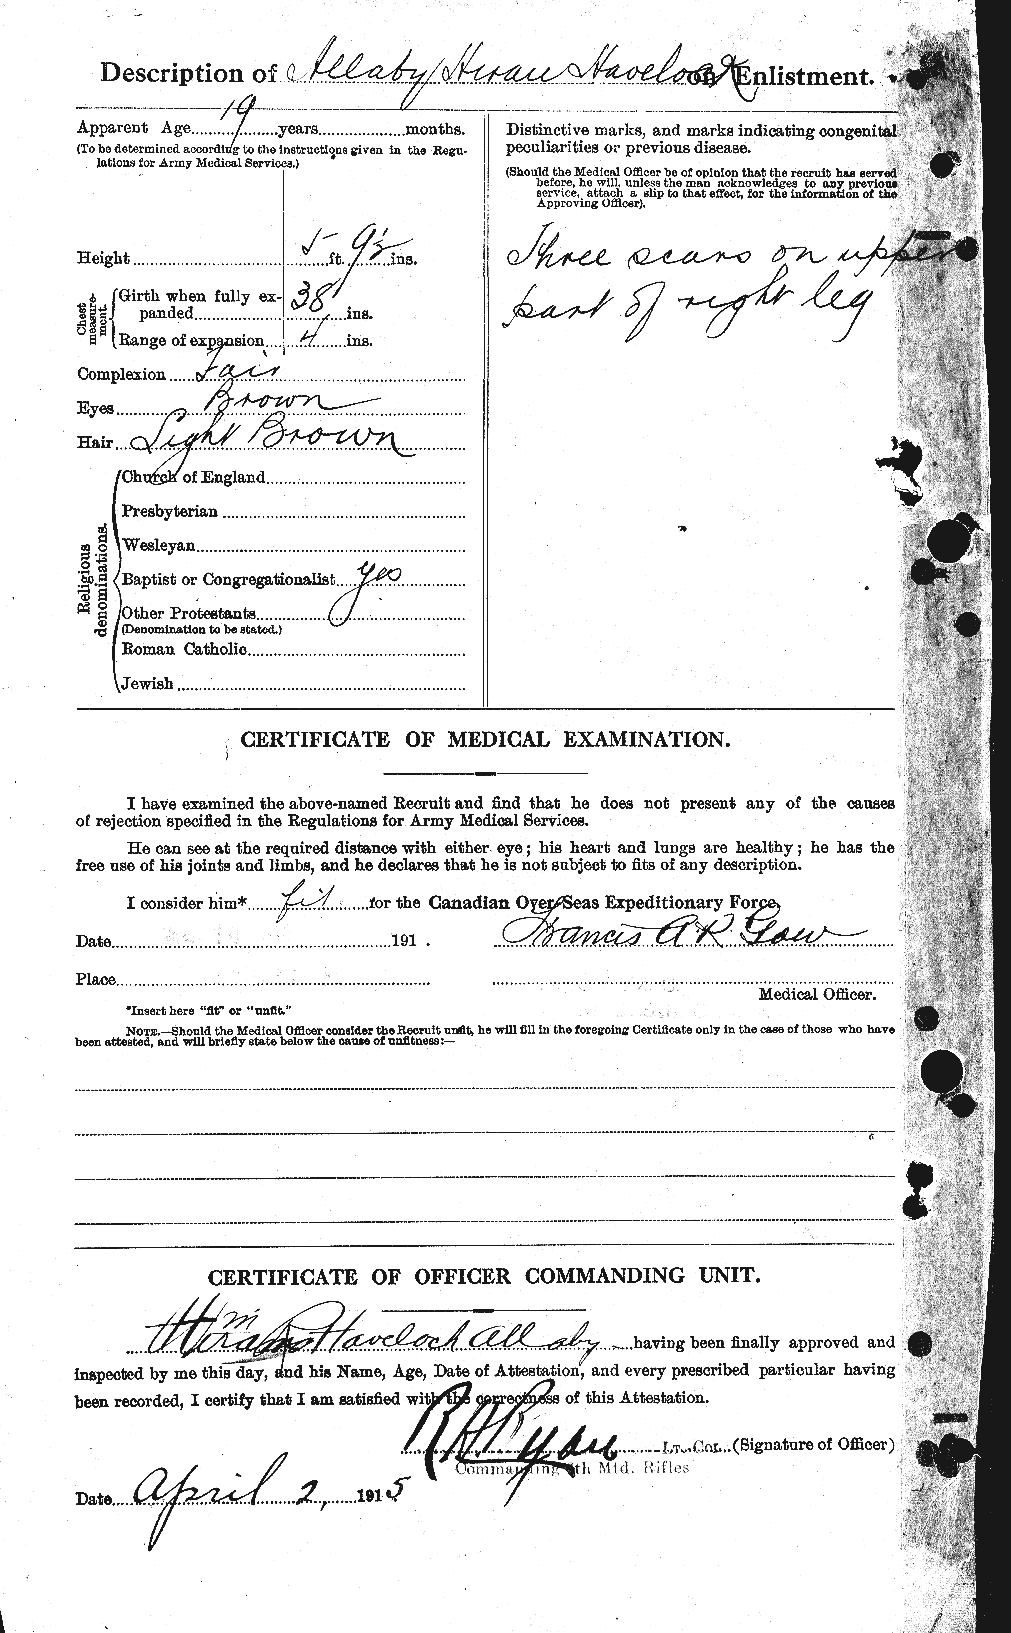 Personnel Records of the First World War - CEF 205126b